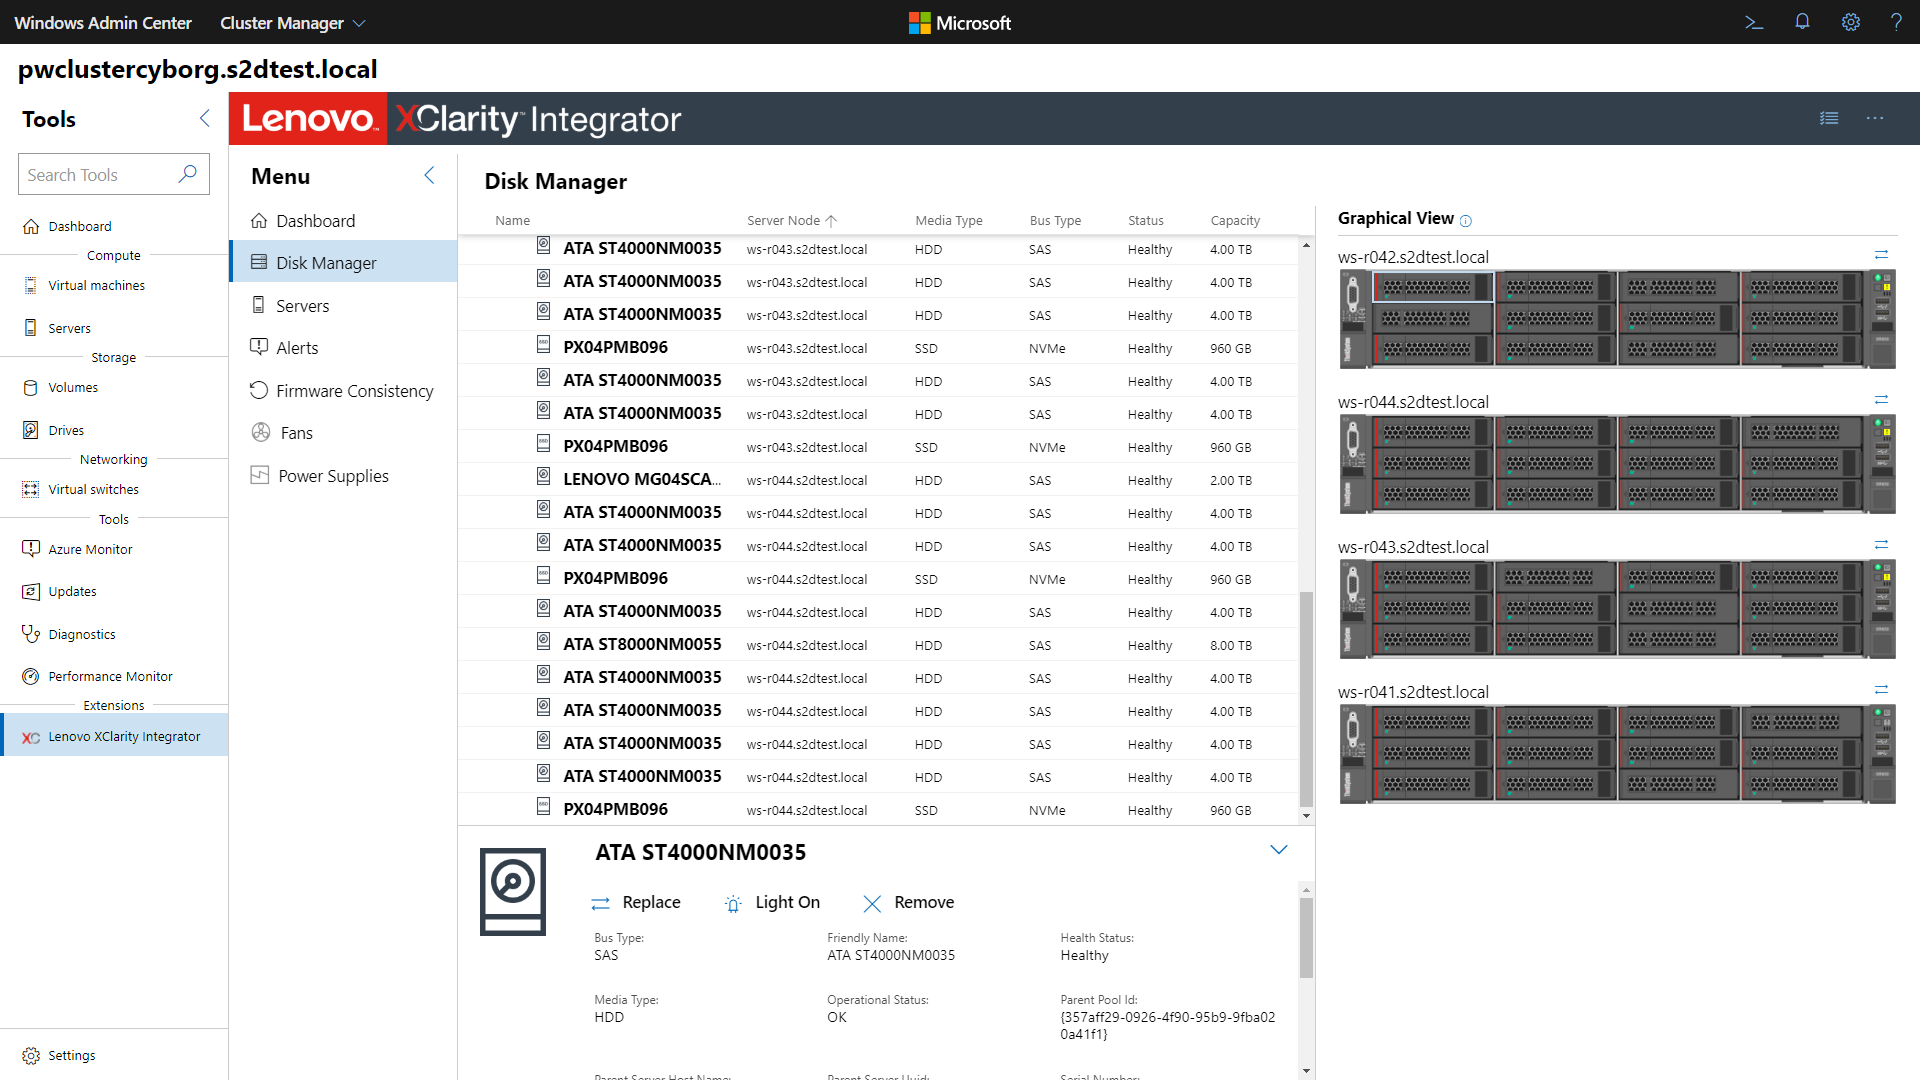 Screenshot of the Lenovo XClarity Integrator extension tool showing the Disk Manager page.